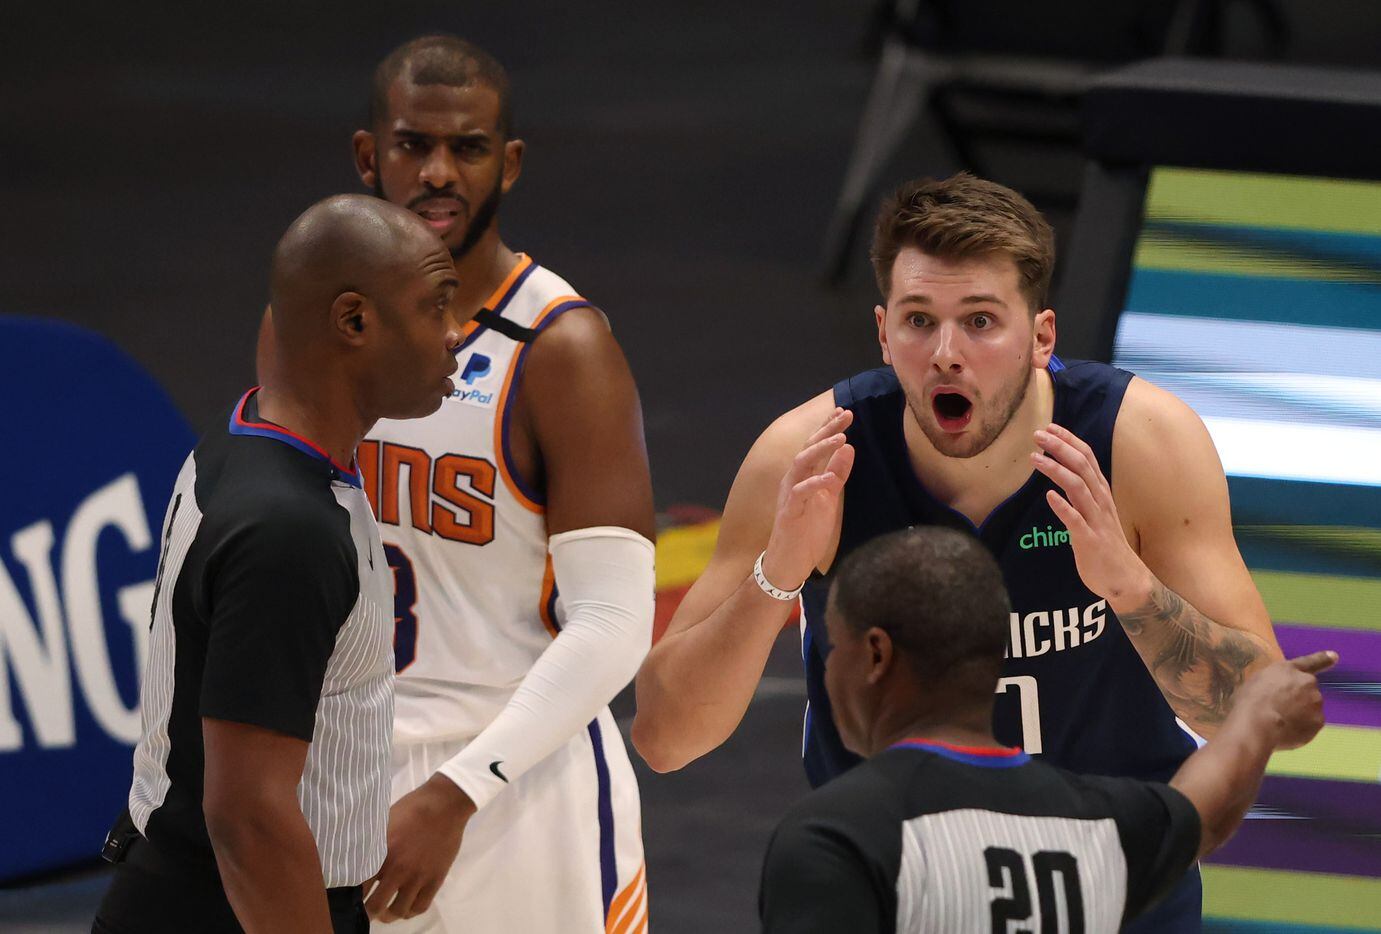 Dallas Mavericks guard Luka Doncic (77) questions the call from referee Leroy Richardson (20) as Phoenix Suns guard Chris Paul (3) looks on during the fourth quarter of play at American Airlines Center on Monday, February 1, 2021in Dallas. The Dallas Mavericks lost to the Phoenix Suns 109-108. (Vernon Bryant/The Dallas Morning News)